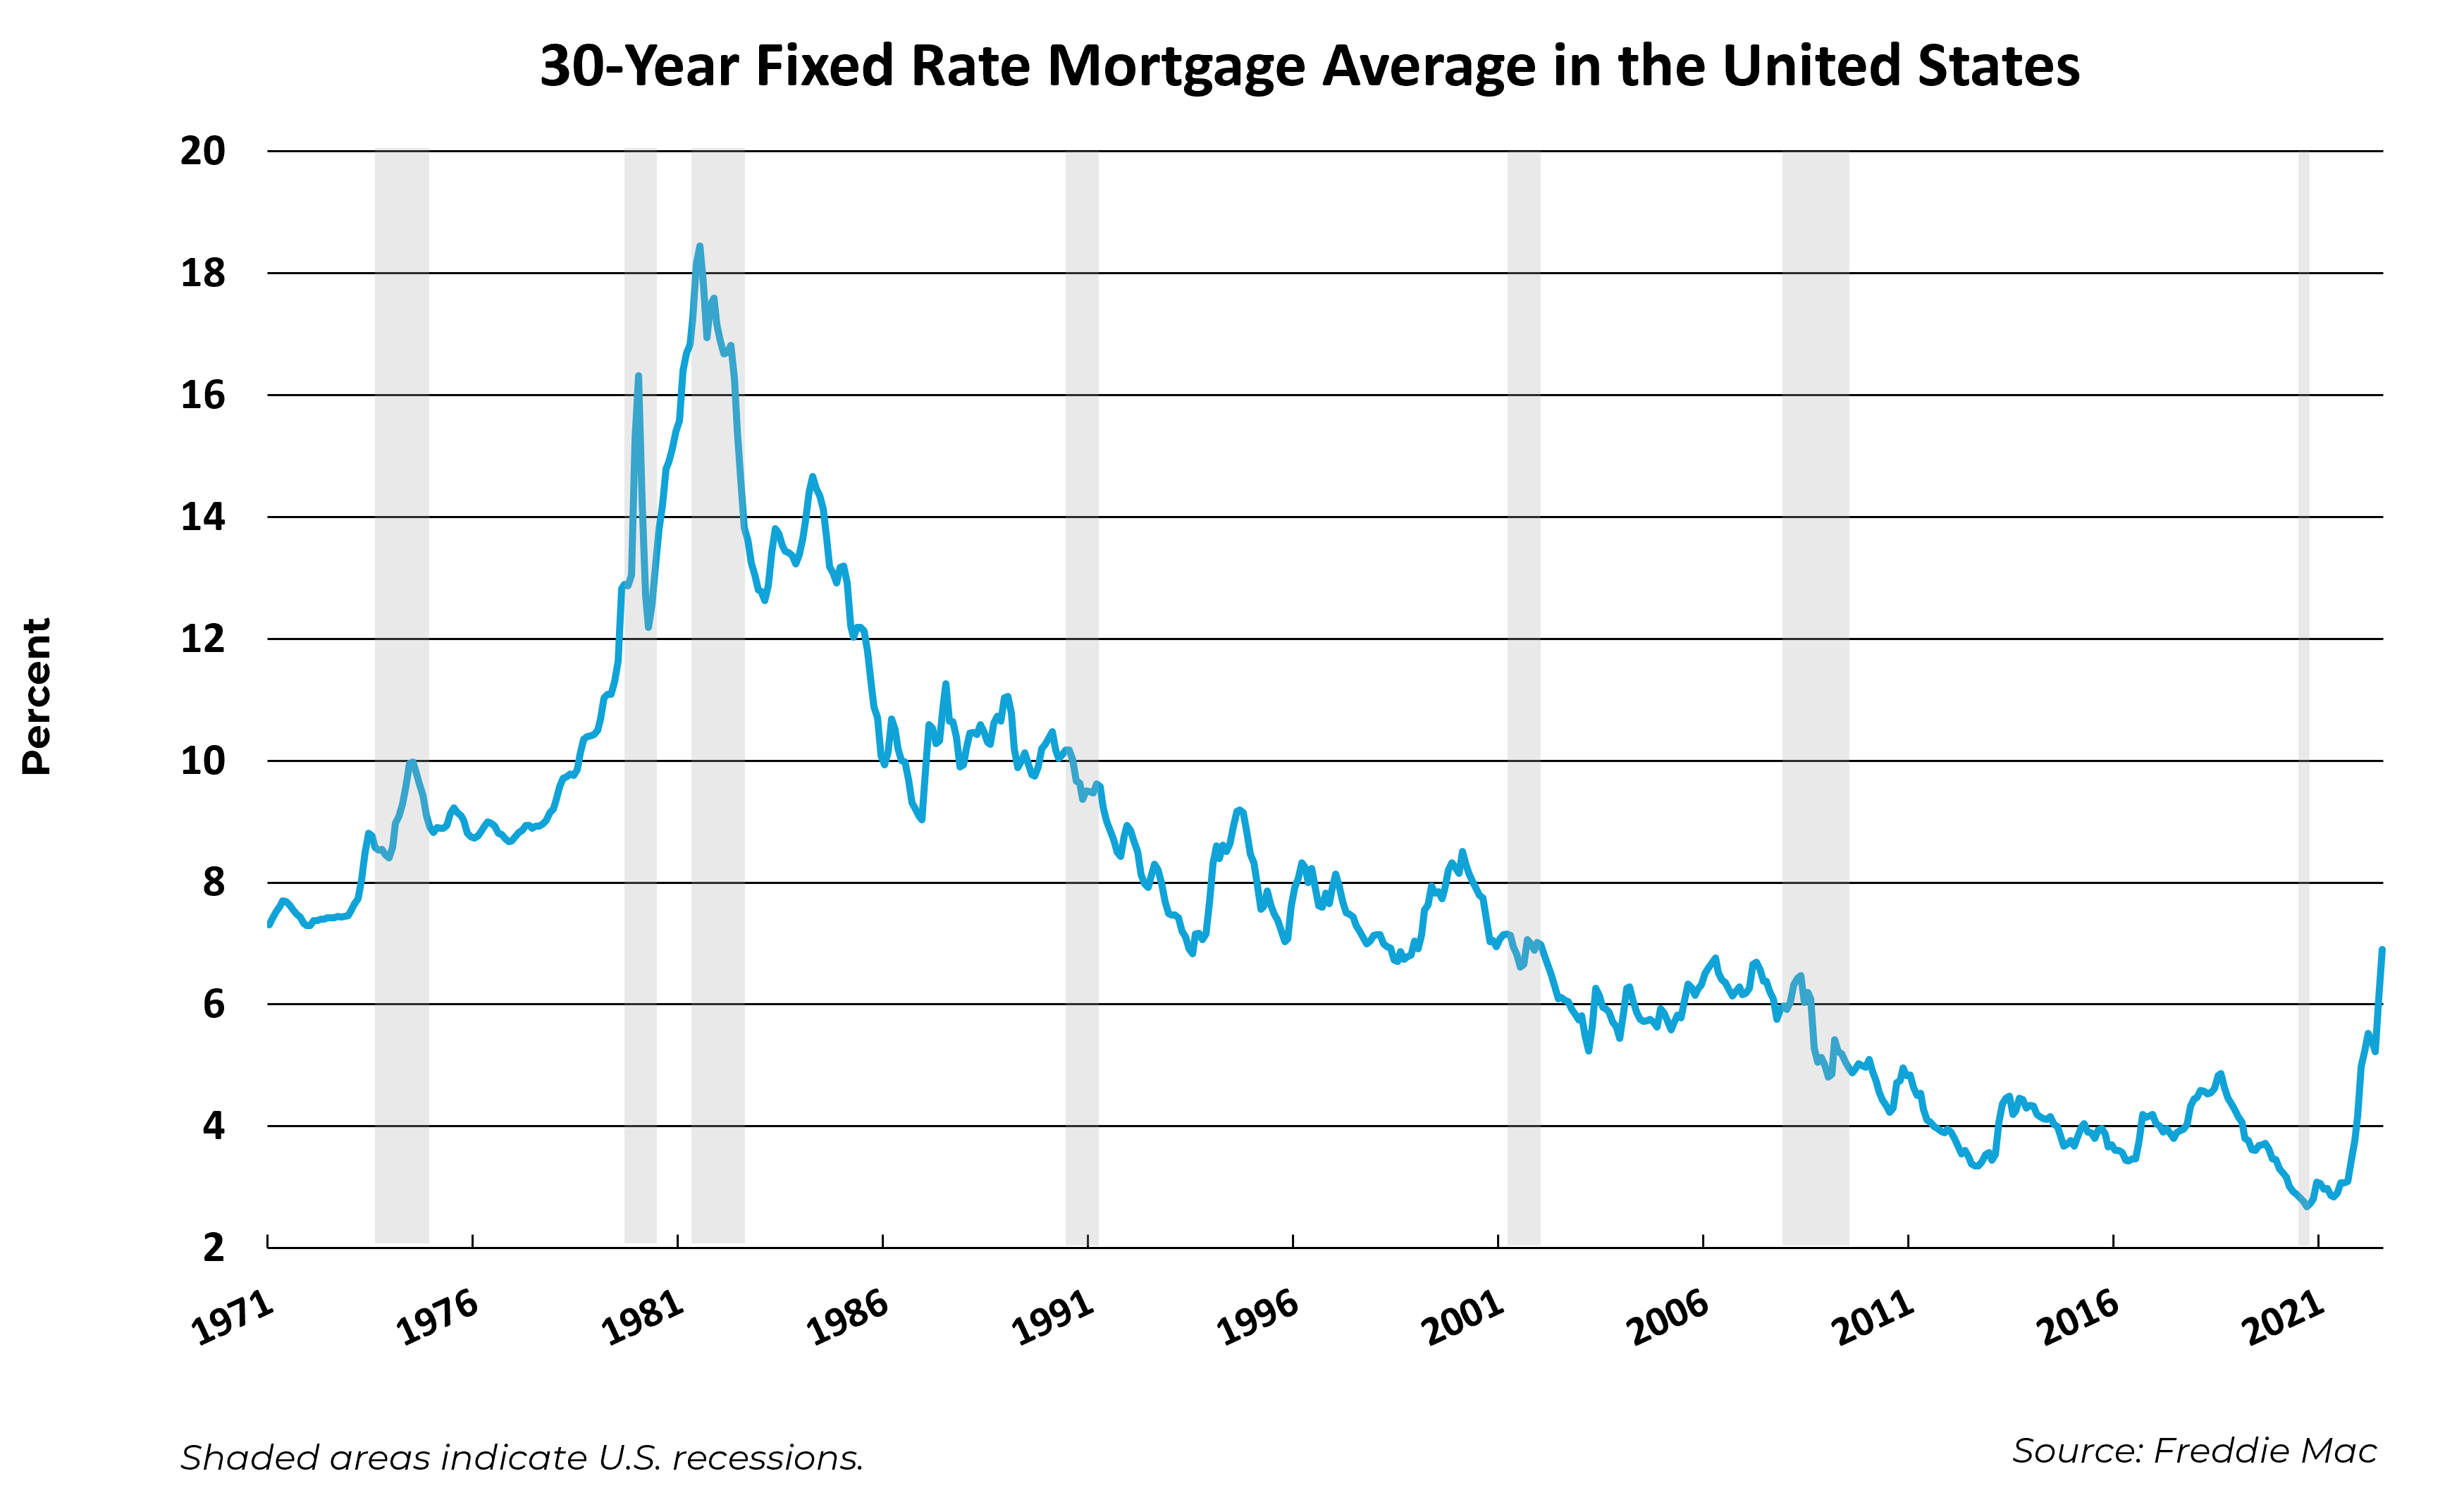 30-Year Fixed Mortgage Rate Average In The United States